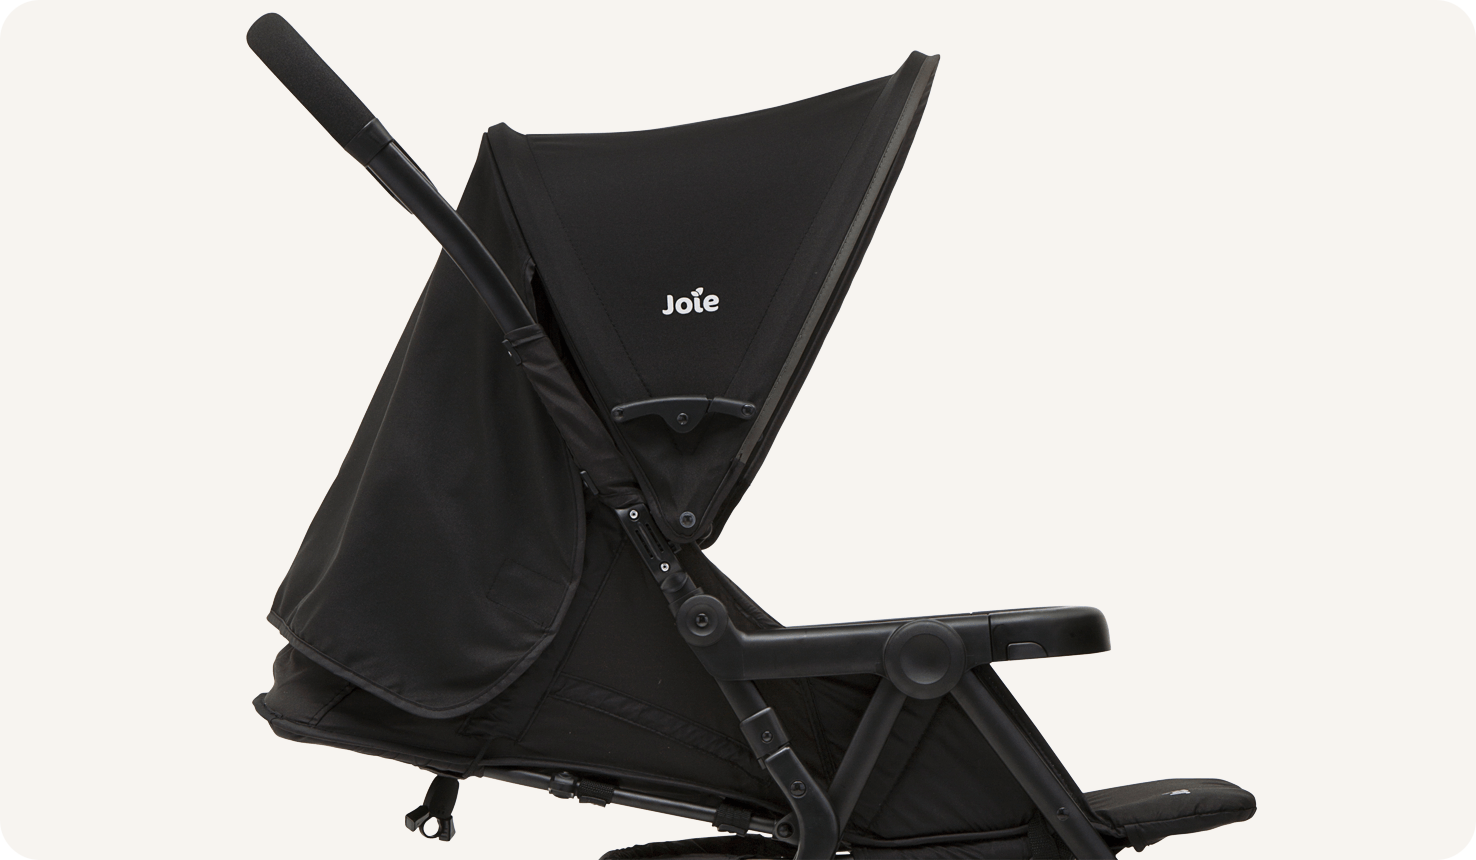  Joie i-Juva travel system pushchair in black close-up of the seat reclined.